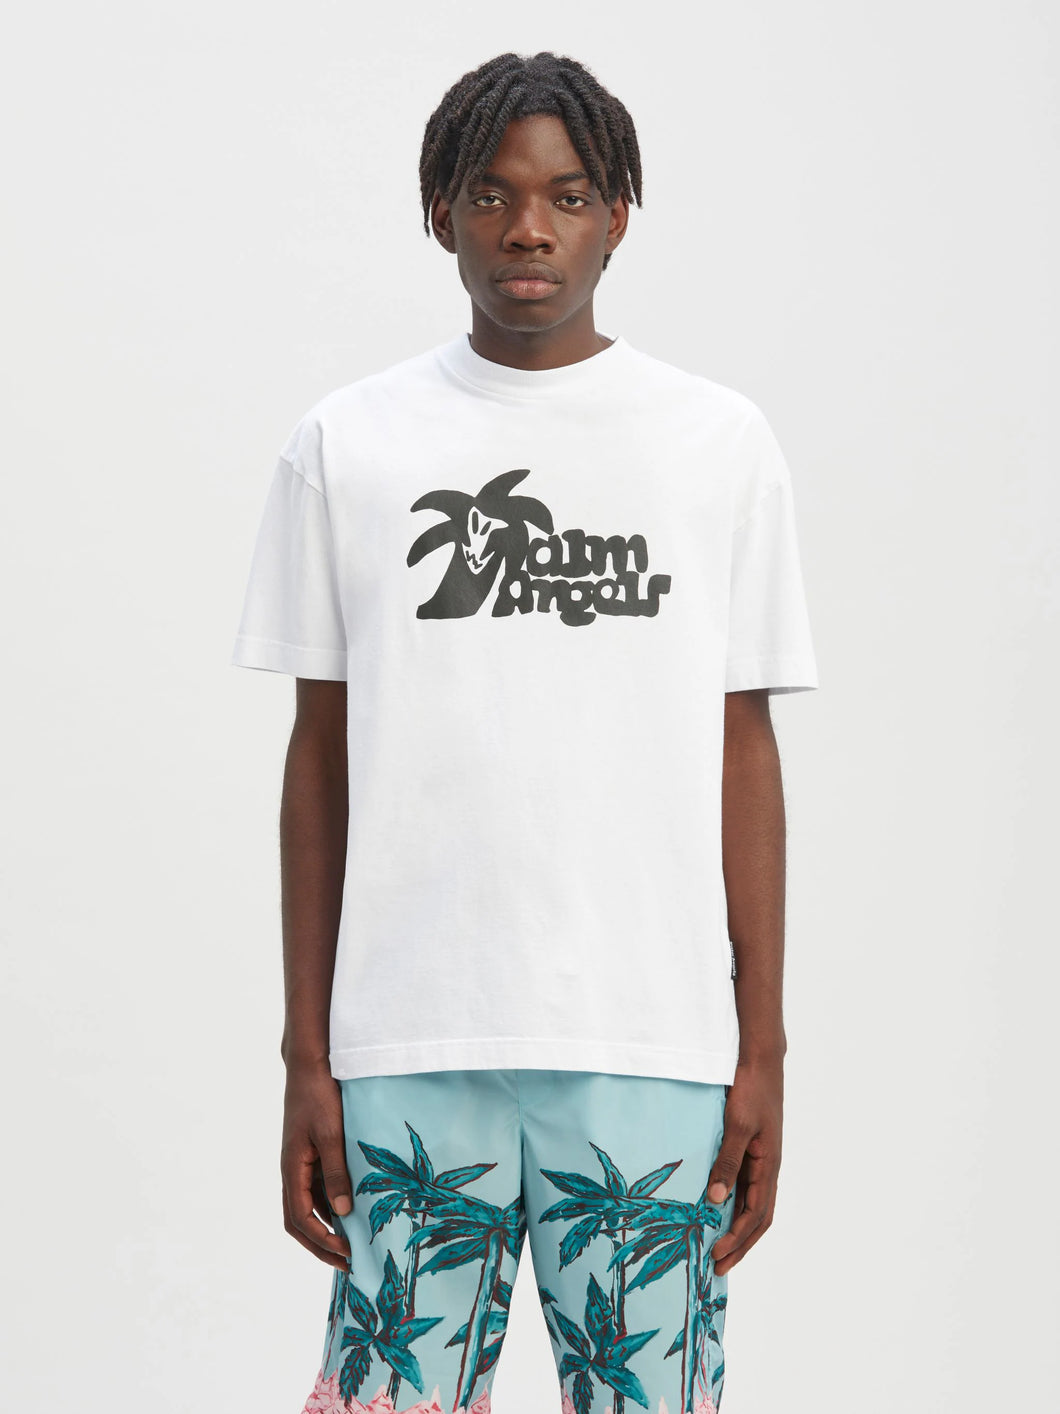 T-SHIRT HUNTER PALM ANGELS NEW COLLECTION FW 23/24